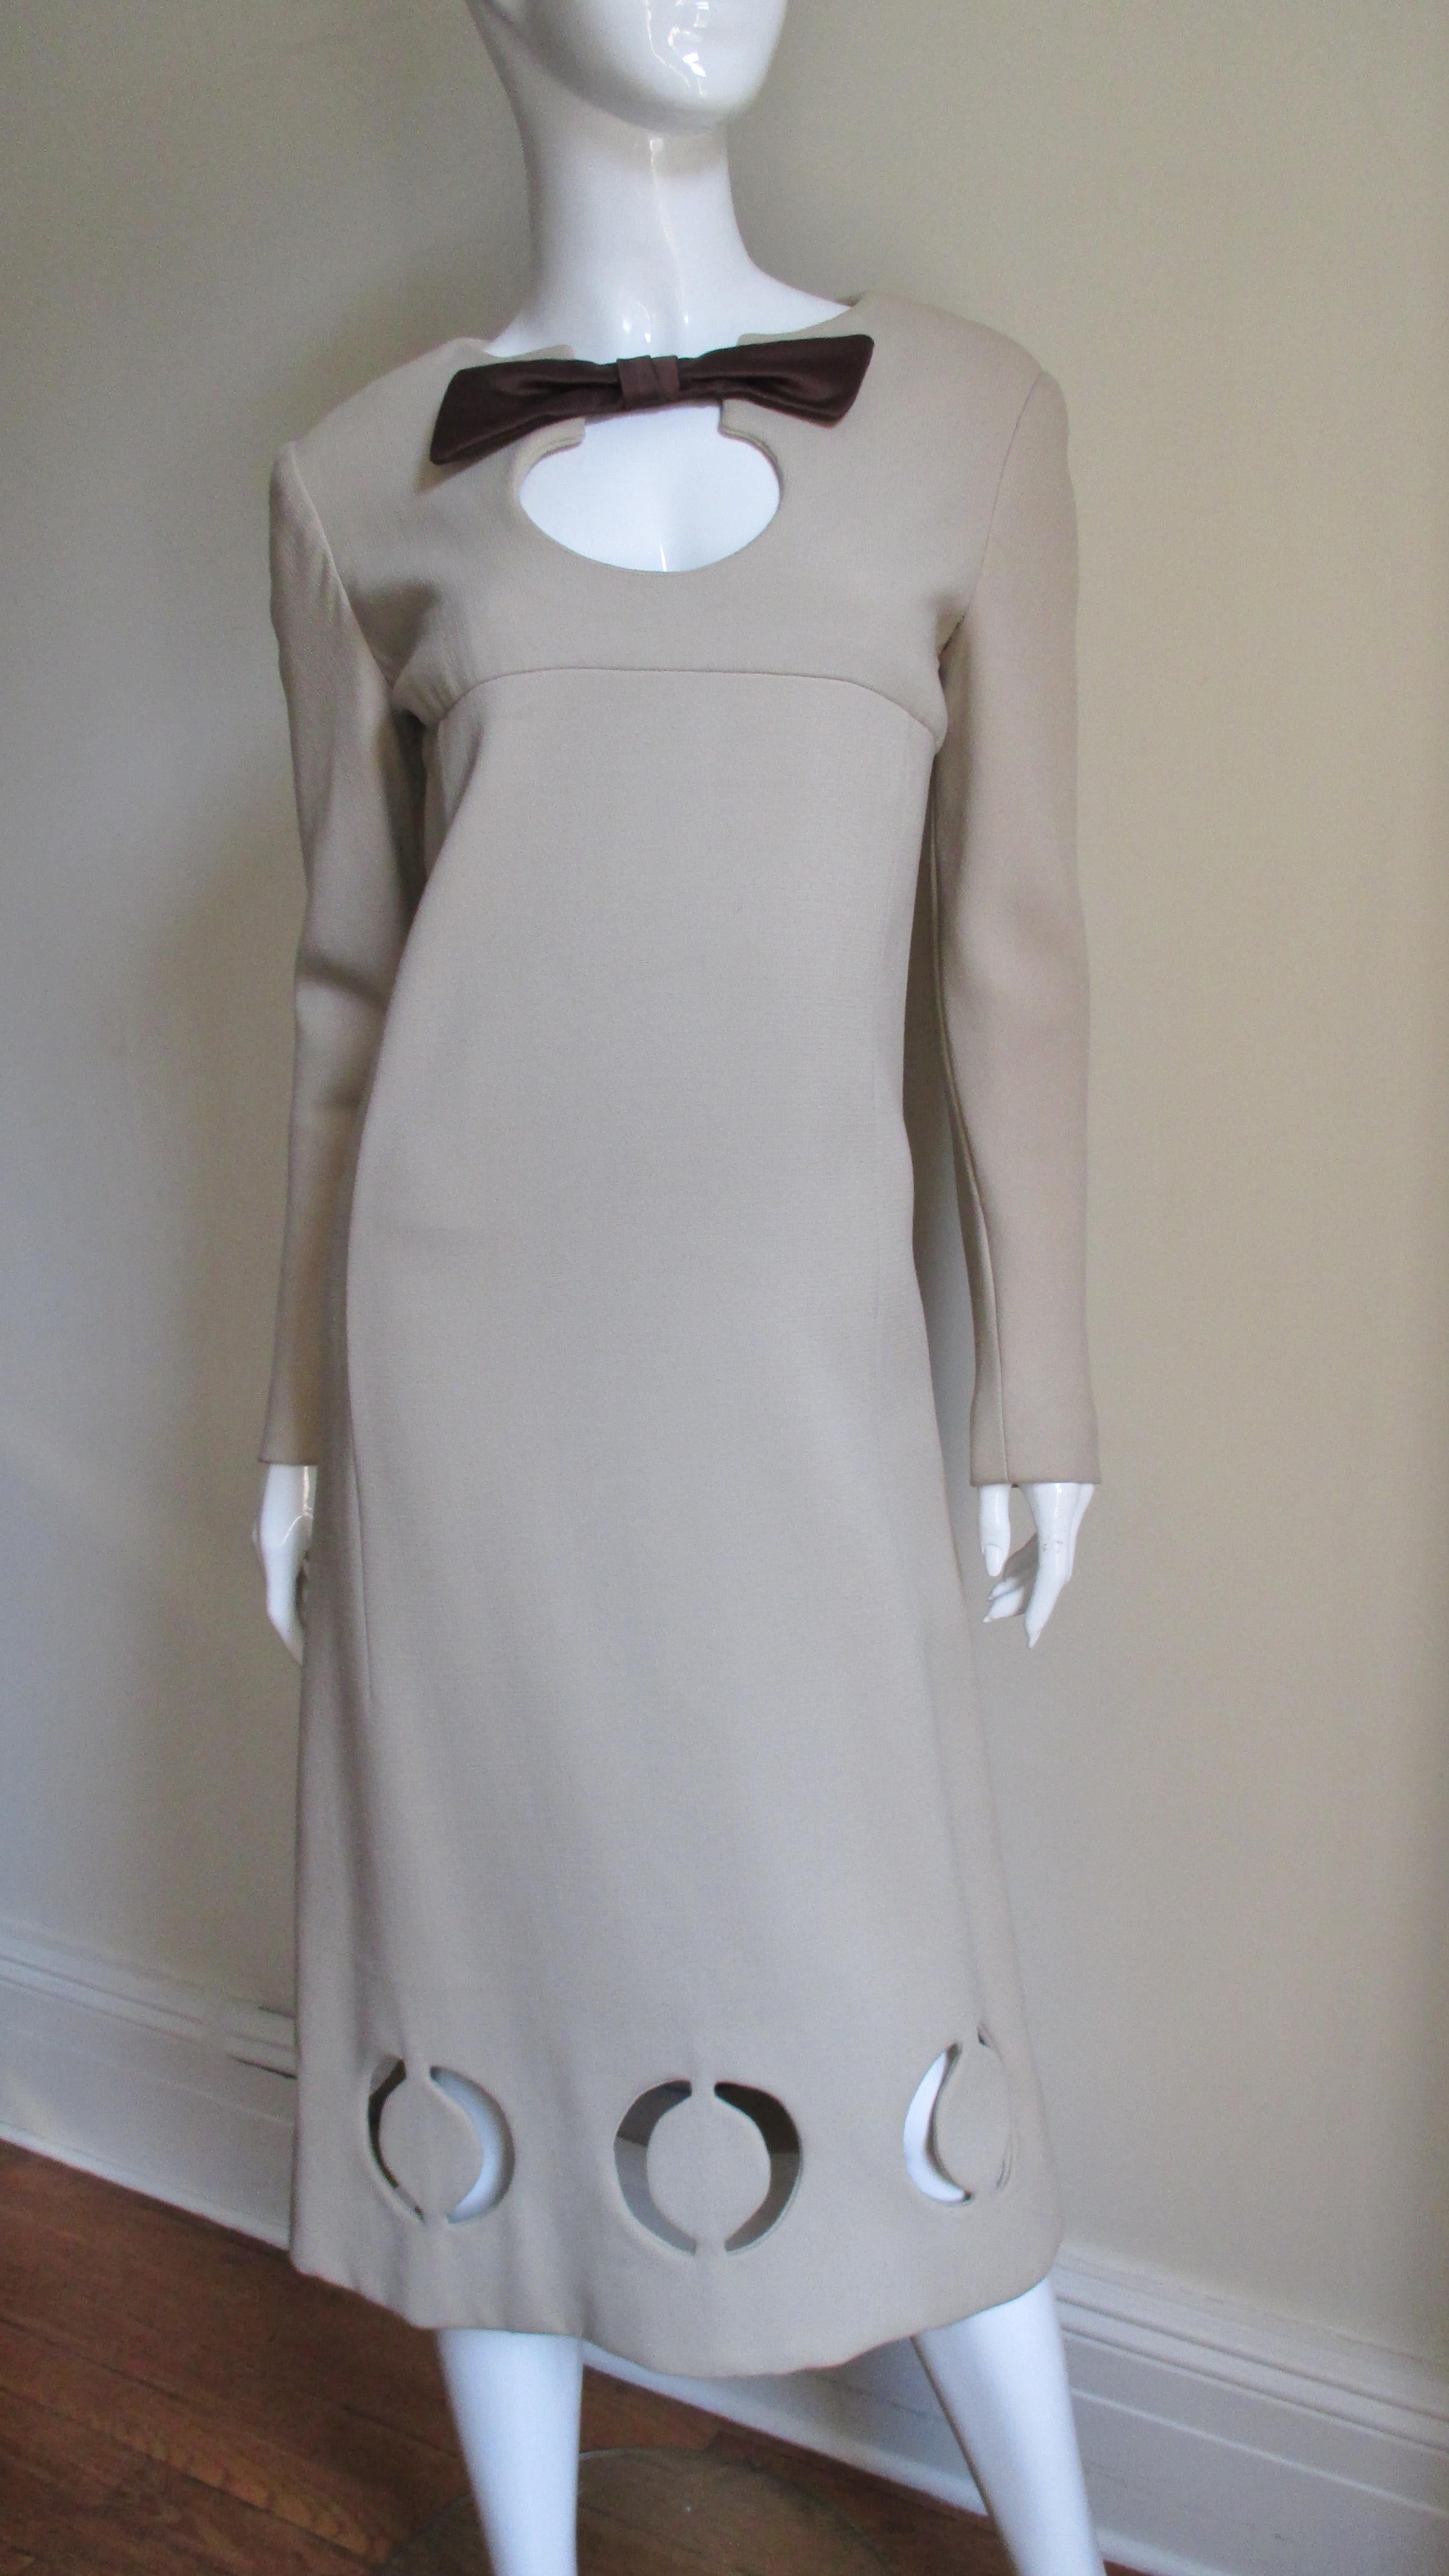 A fabulous dress from Pierre Cardin in light taupe wool.  It has front and back yokes, long sleeves, and a crew neckline with a silk bow at the top of a circular cut out.  The dress slightly widens towards the hem where there are detailed circular